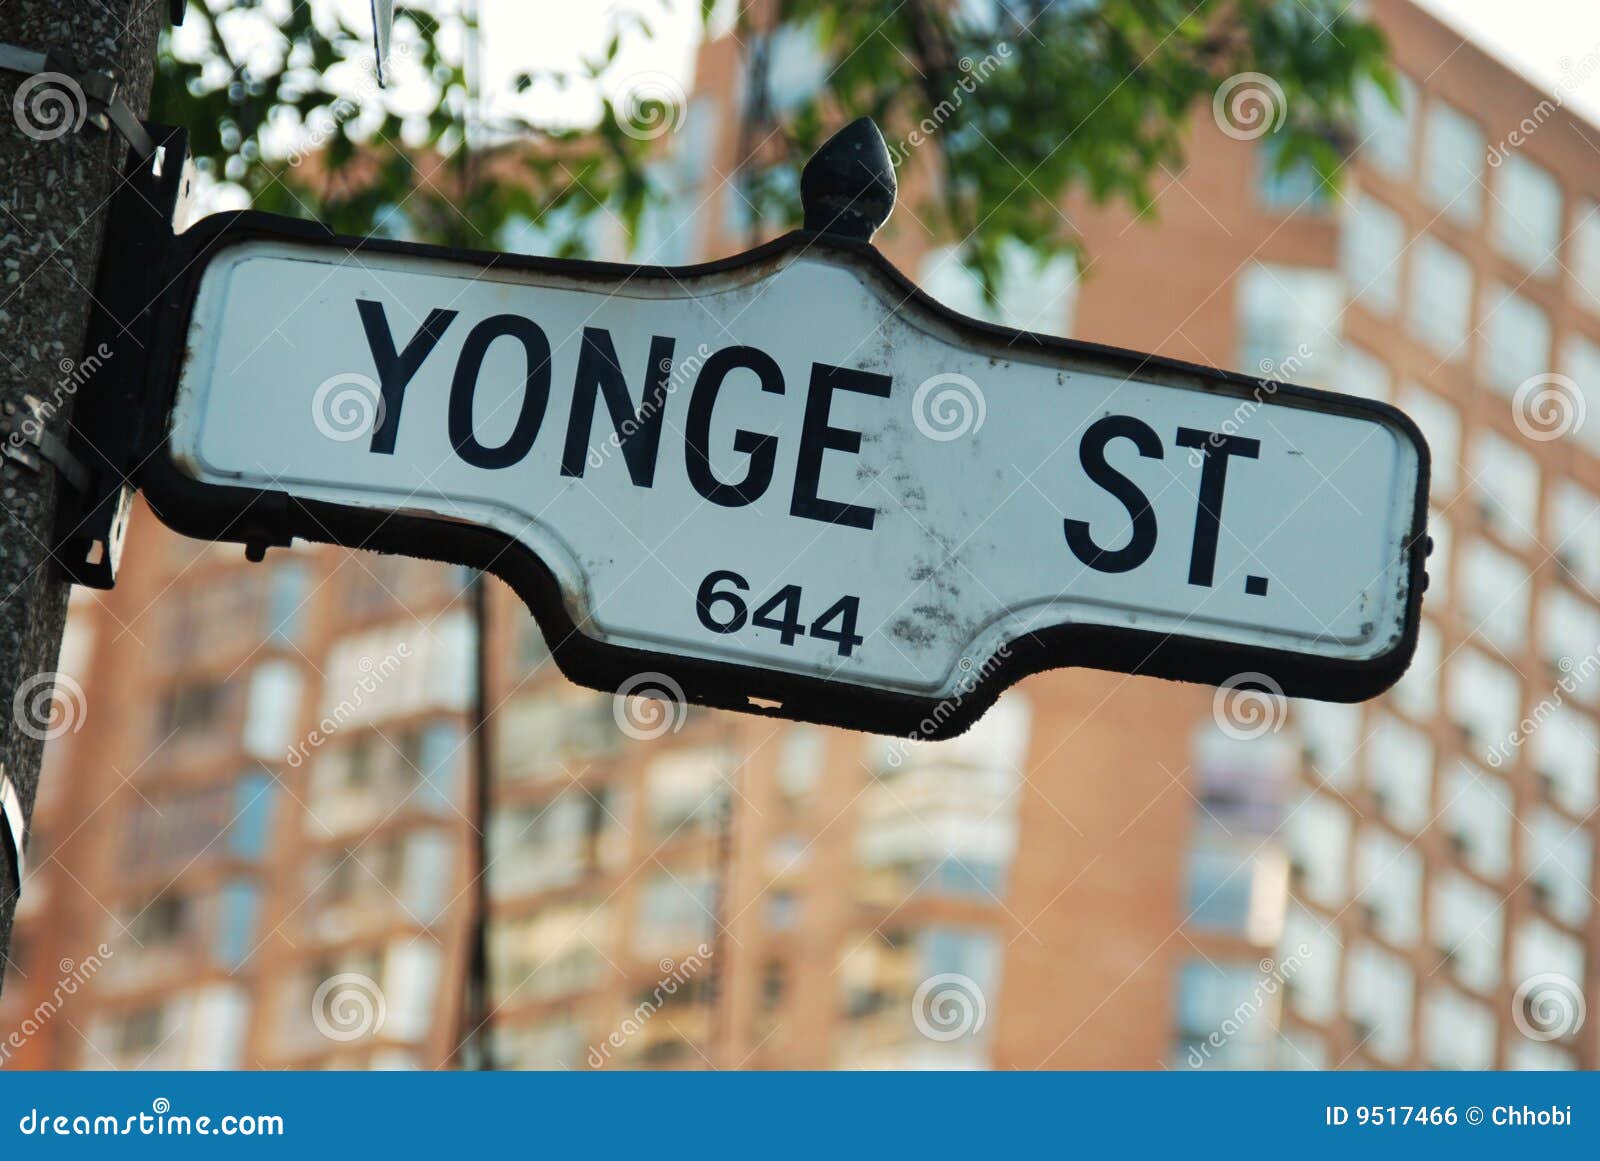 yonge street - the most famous road in canada